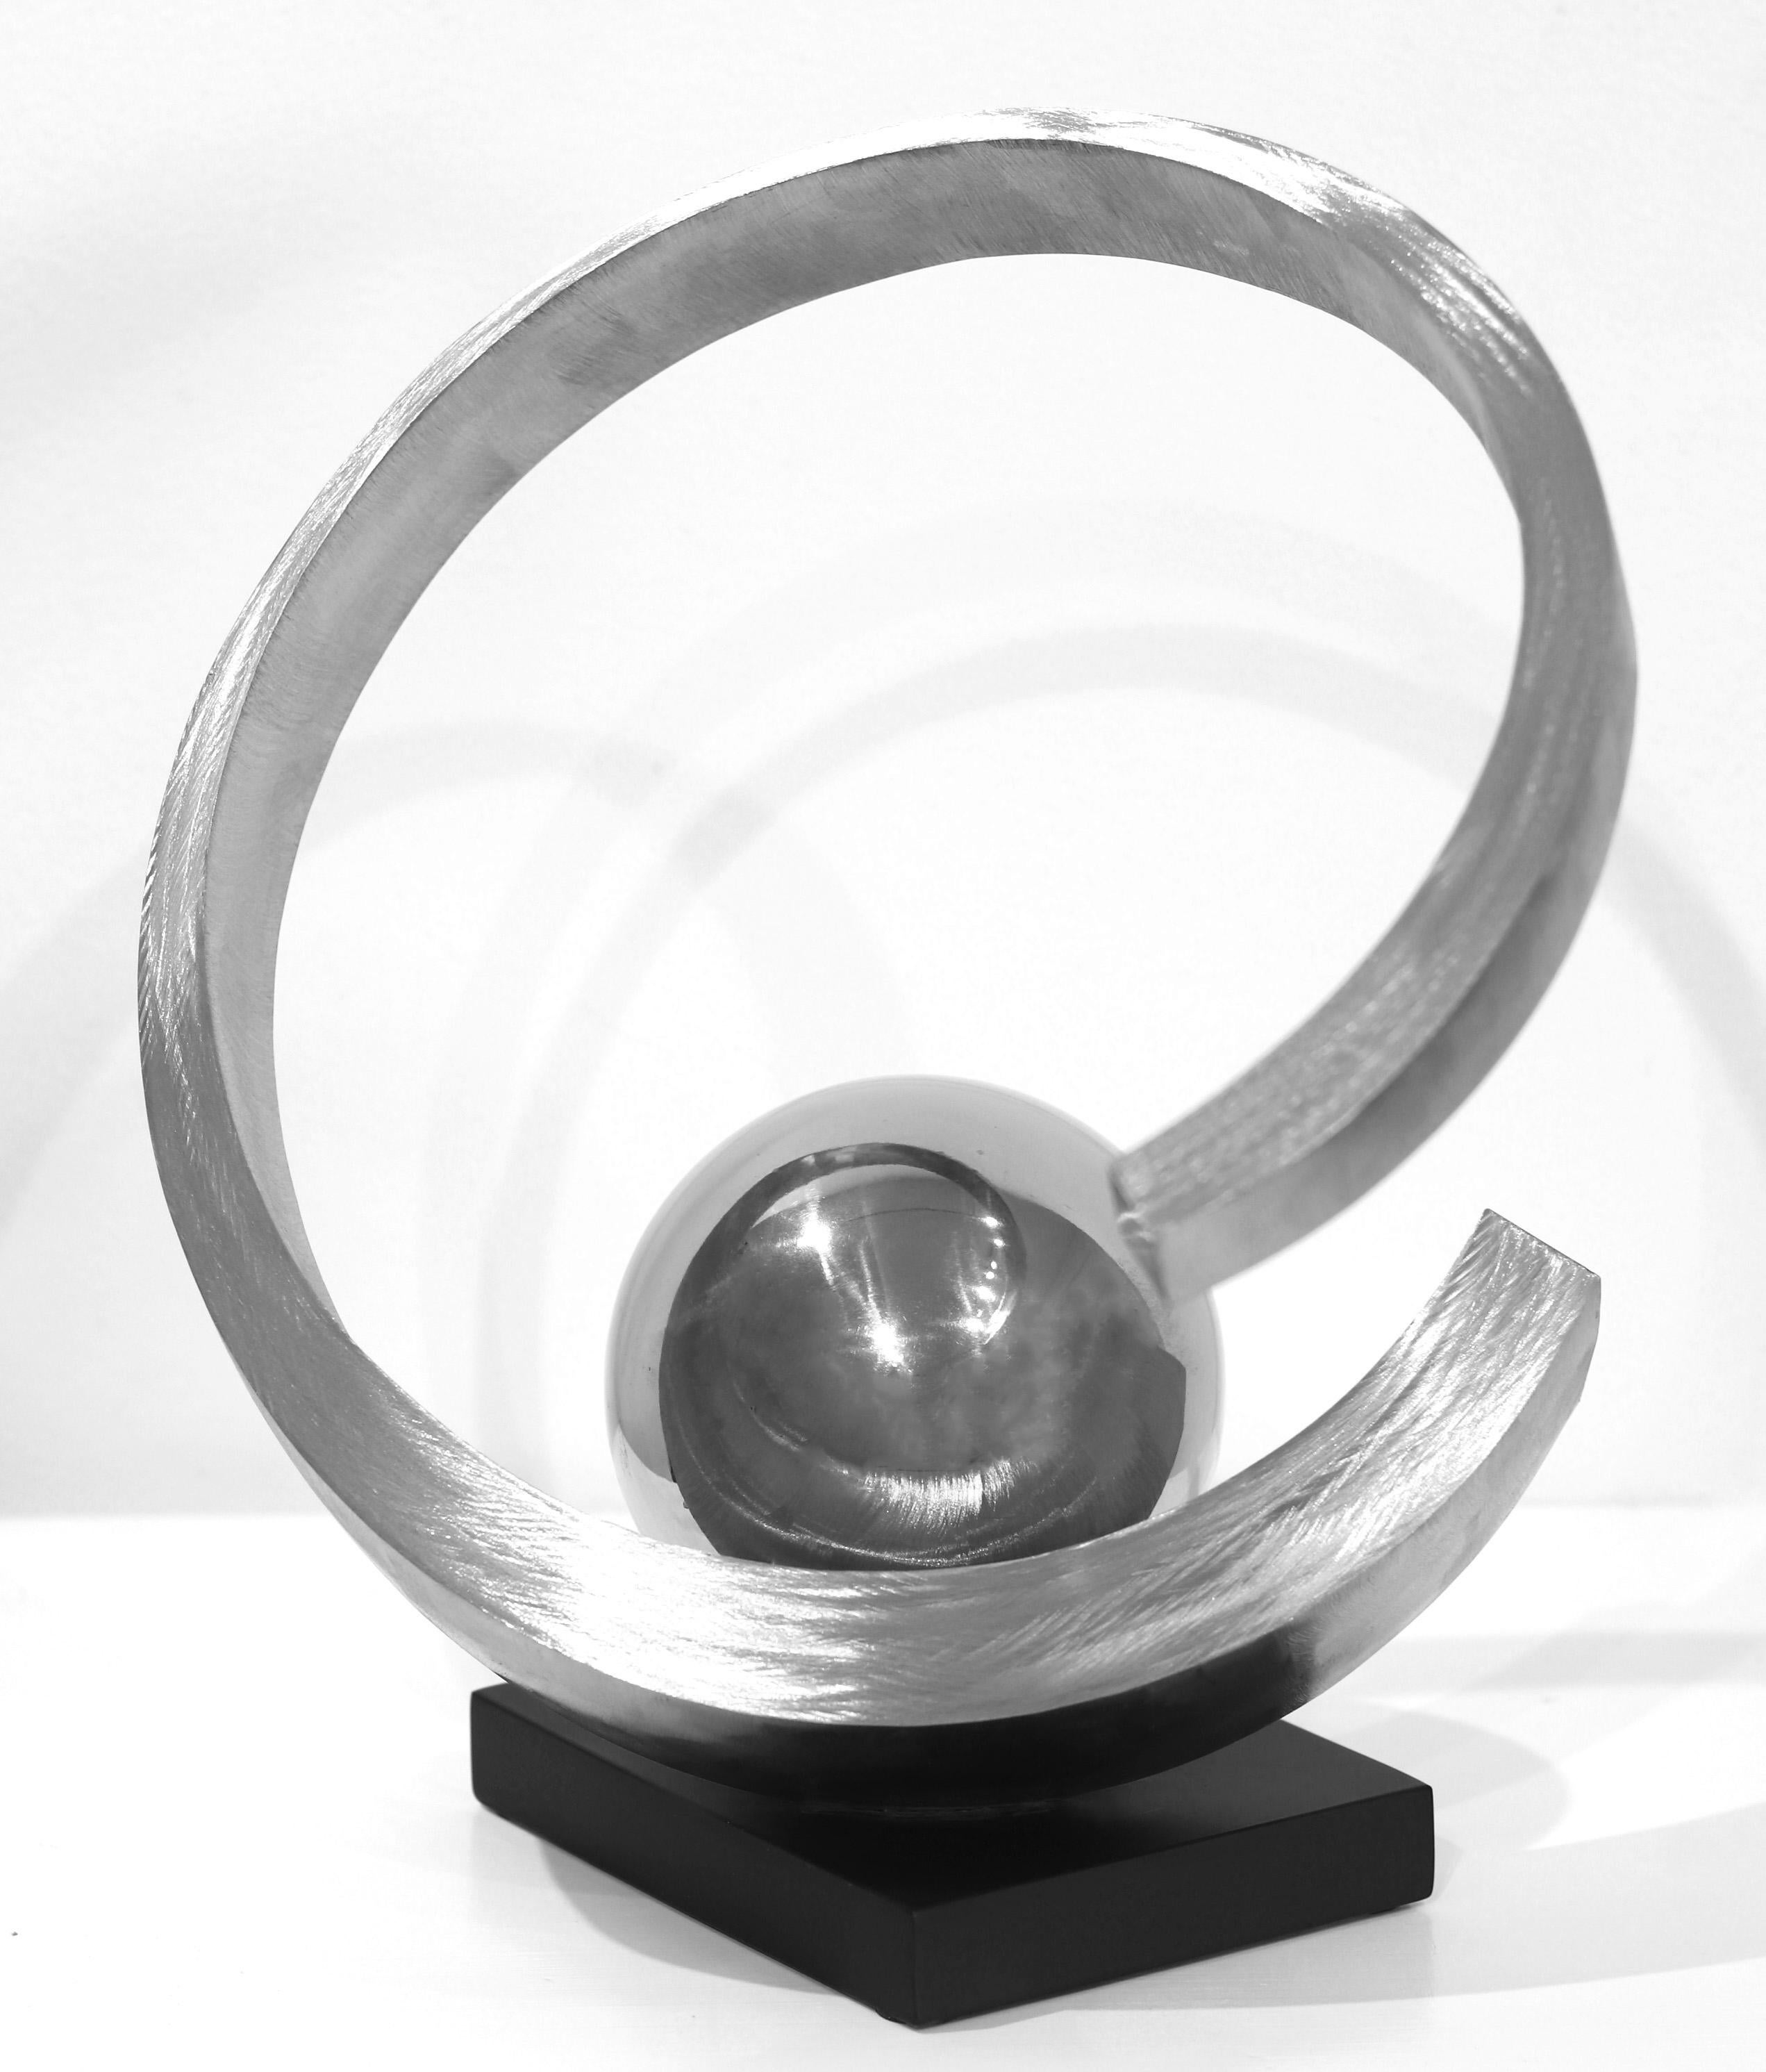 Follow Through - Original Sculpture Reflective and Matte Steel Ball and Circle For Sale 3